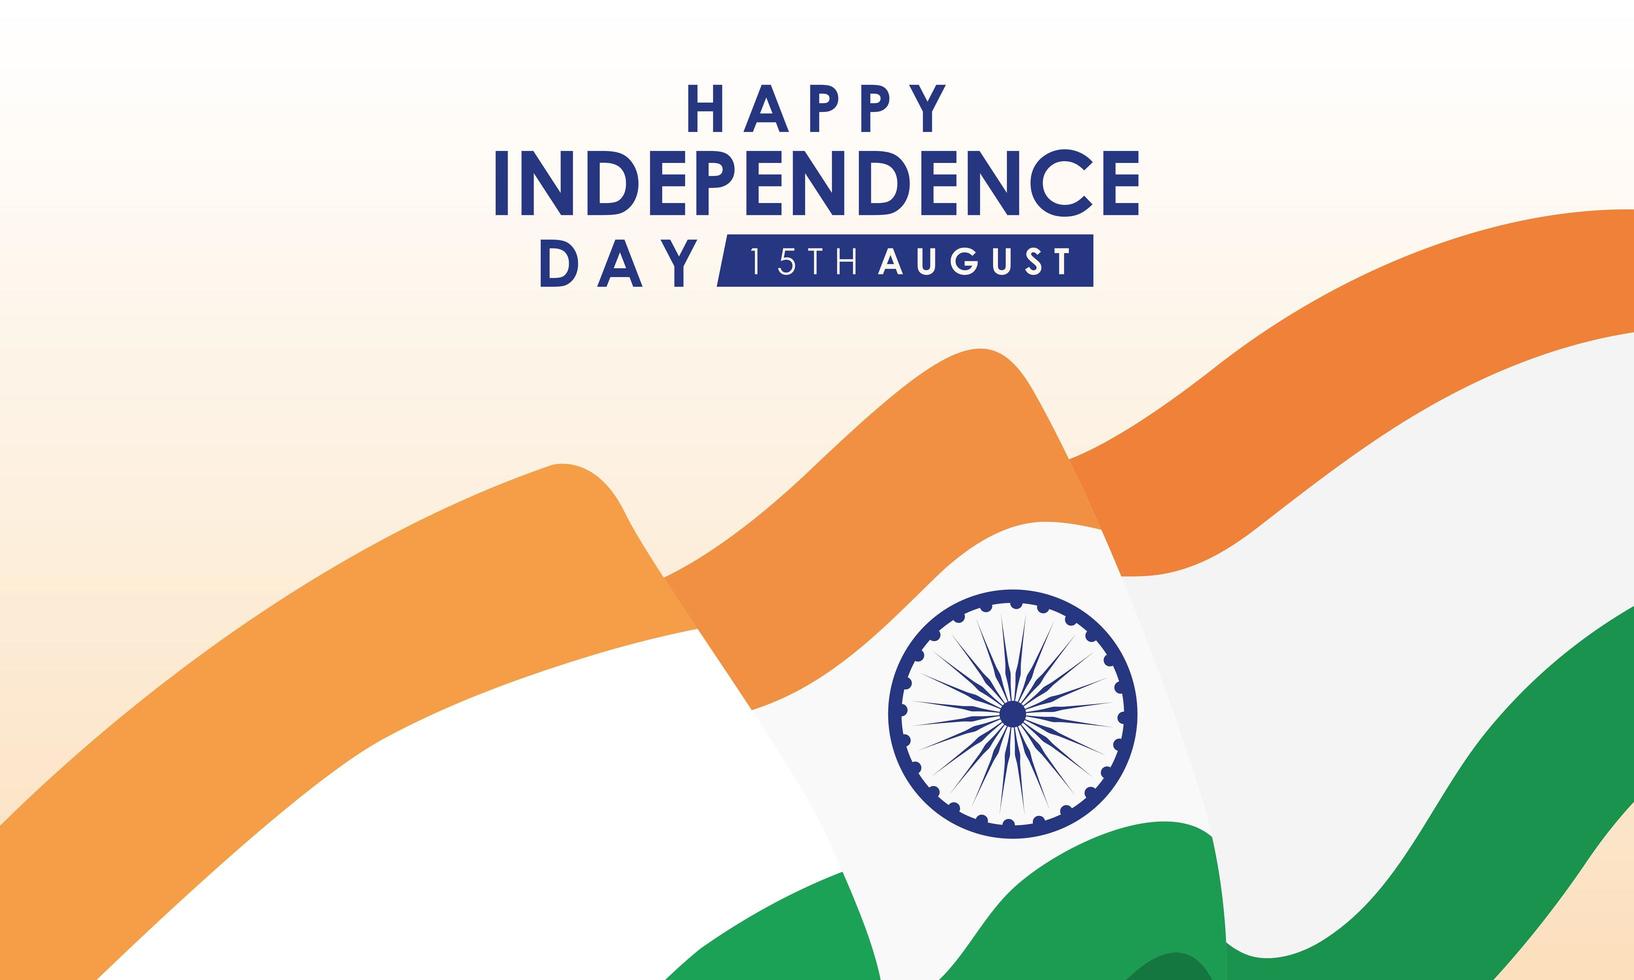 Happy India Independence Day Feier Banner vektor